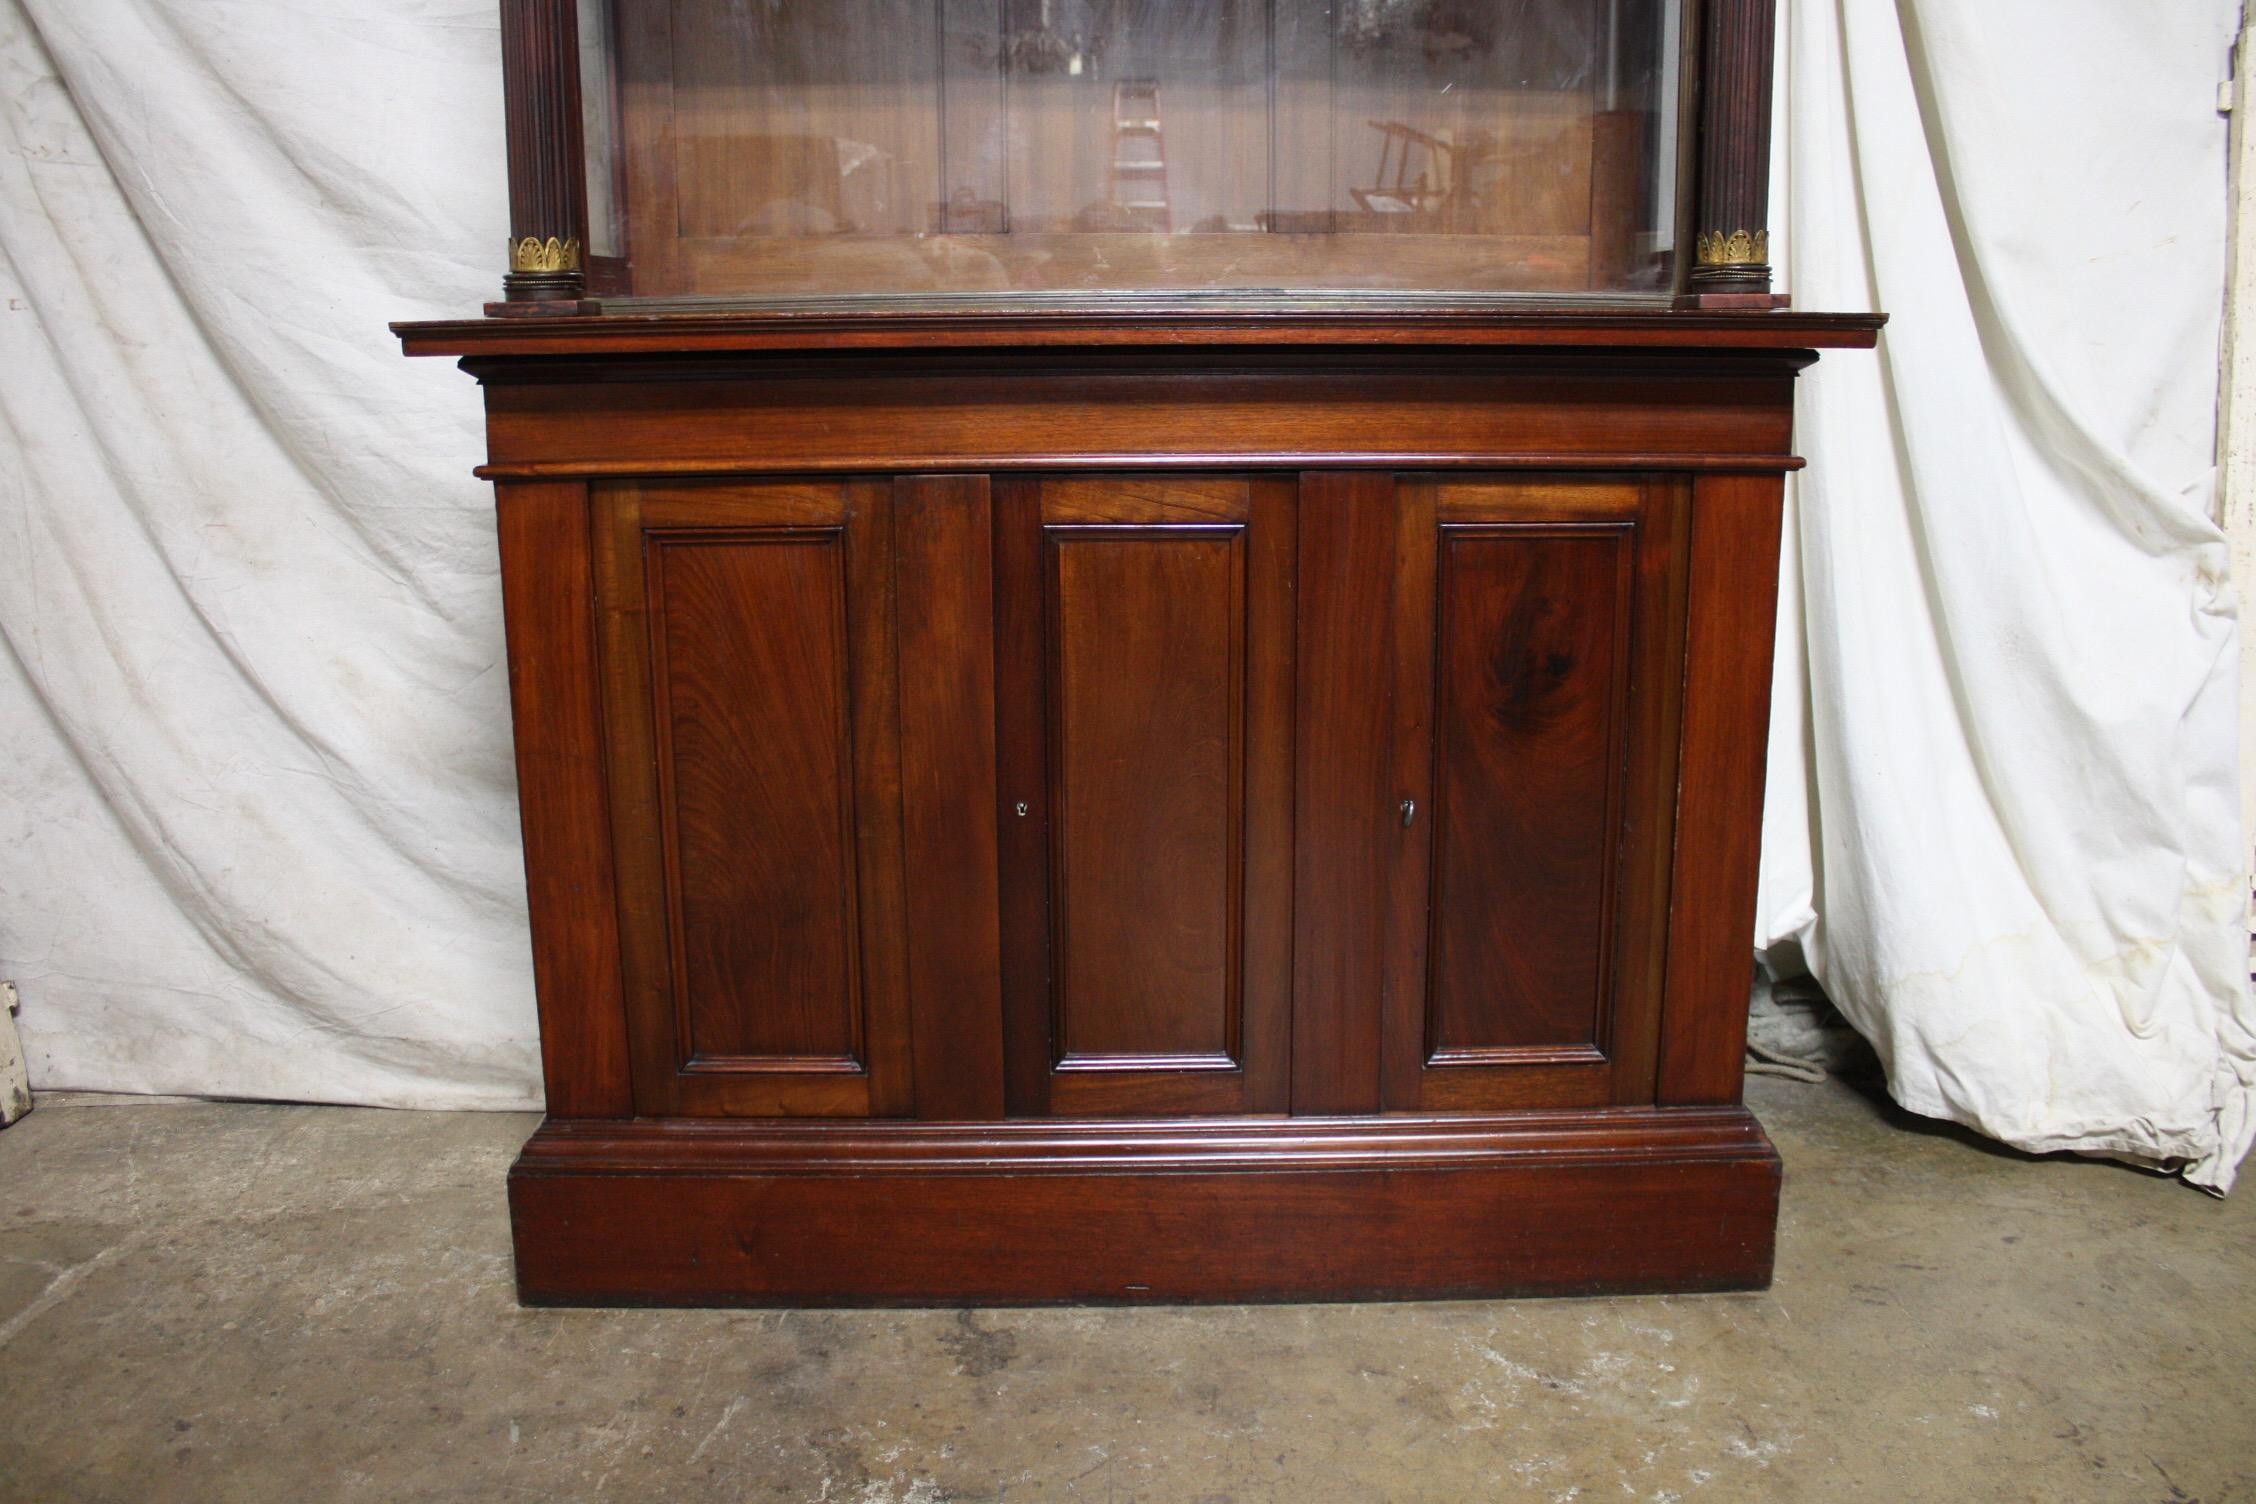 French 19th Century Apothecary Cabinet In Good Condition For Sale In Stockbridge, GA